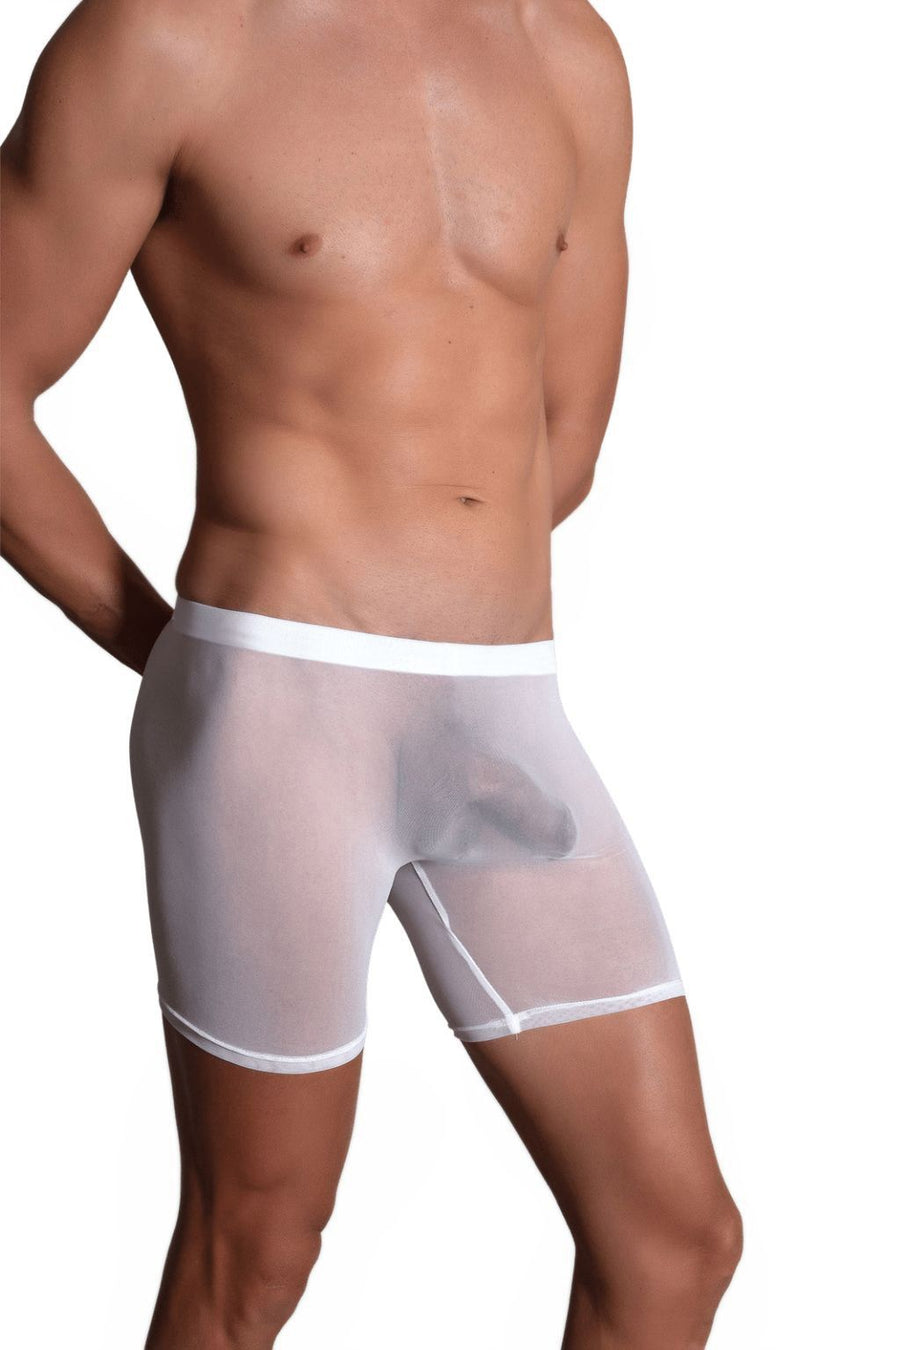 Bodywear for Men Ultra Sheer High Waist Boxer Shorts #BfM-1042 made from a fine poly blend sheer material. Our Sheer Boxer shorts sit high on your waist, 4' long legs, seamless front with a center seamed rear in  White